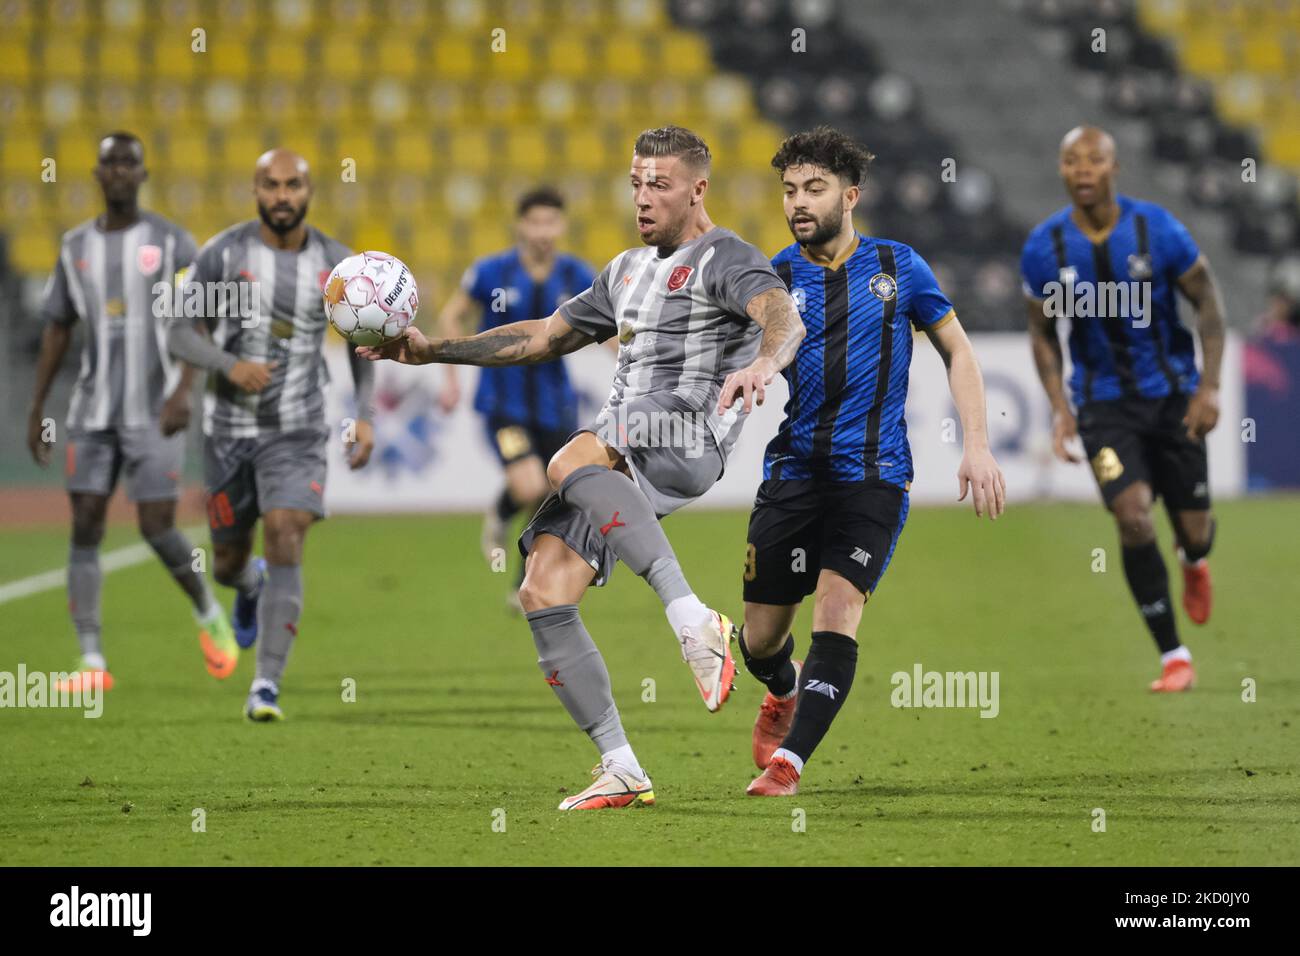 Toby Alderweireld (4) of Al Duhail clears the ball during the QNB Stars League match at the Suheim Bin Hamad Stadium in Doha, Qatar on 17 of January 2022. (Photo by Simon Holmes/NurPhoto) Stock Photo